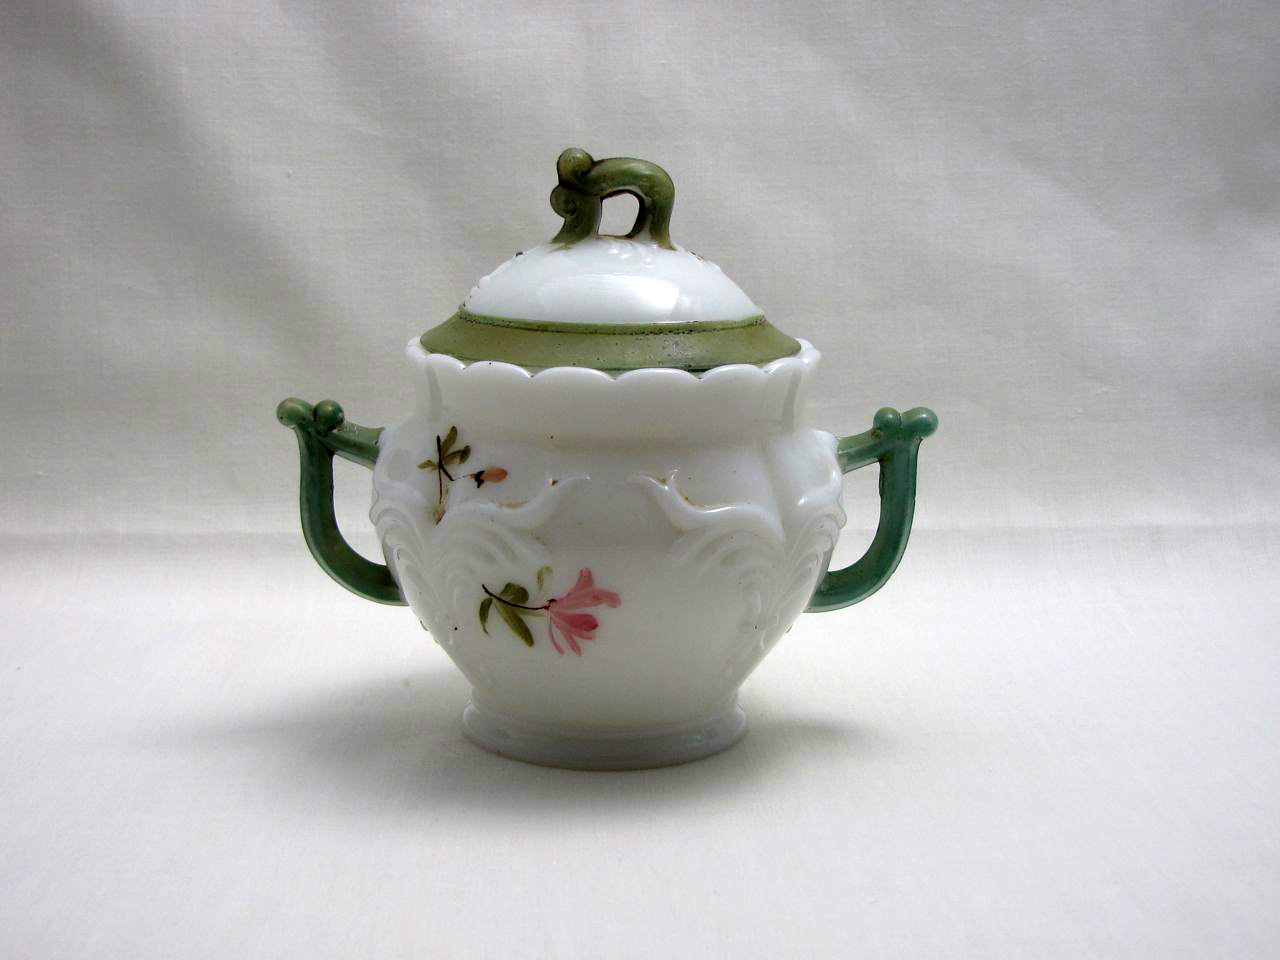 Heisey #1280 Winged Scroll Sugar Bowl and Cover, with decorations, 1899